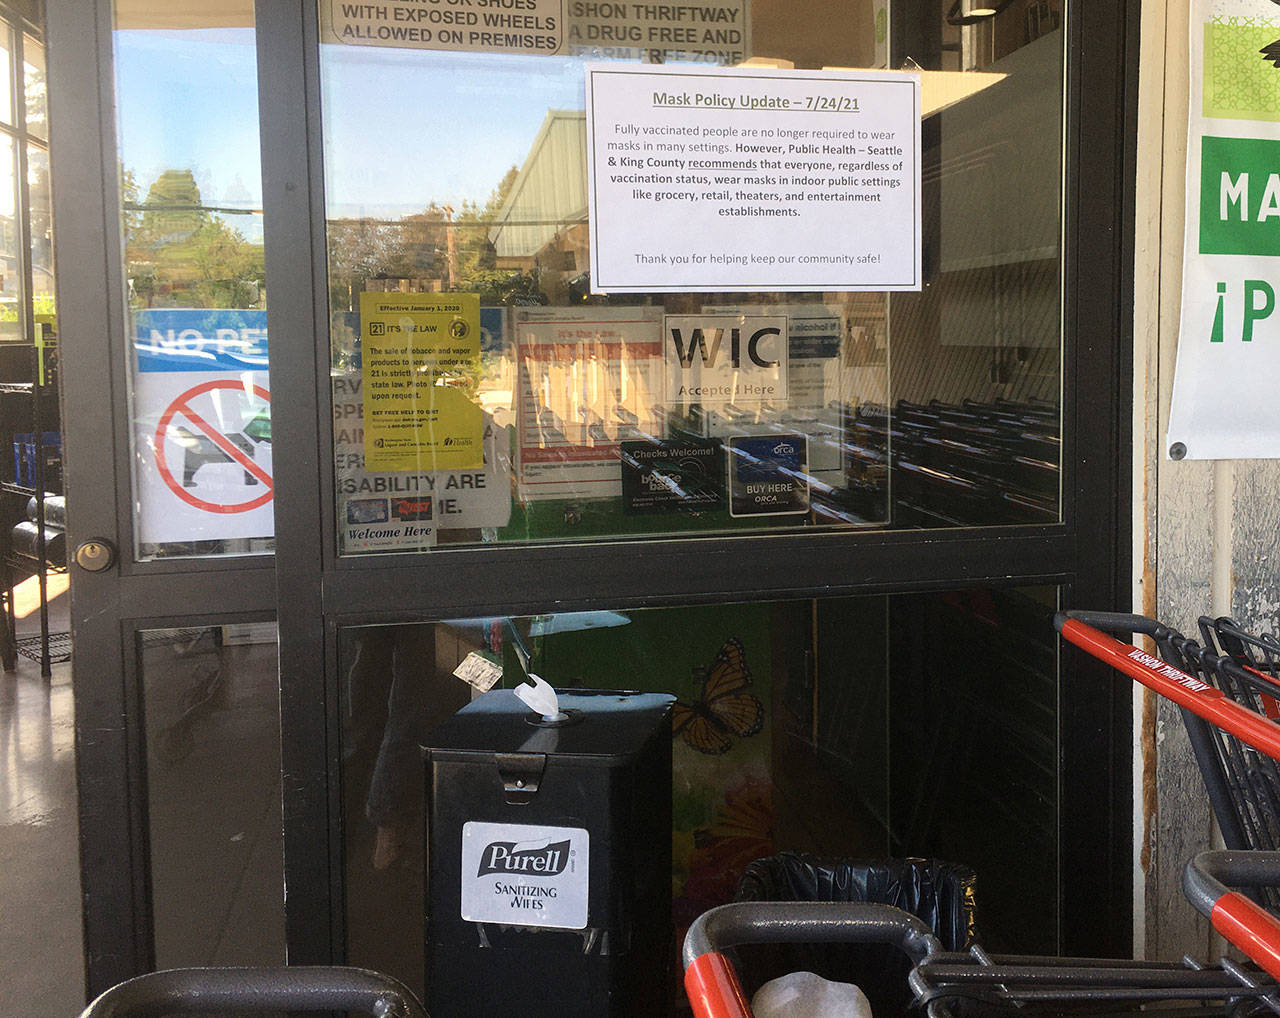 On Monday, new signage appeared at Thriftway, informing shoppers of King County’s new recommendation that masks should be worn in indoor spaces by both vaccinated and unvaccinated people alike (Ellie Hughes Photo).